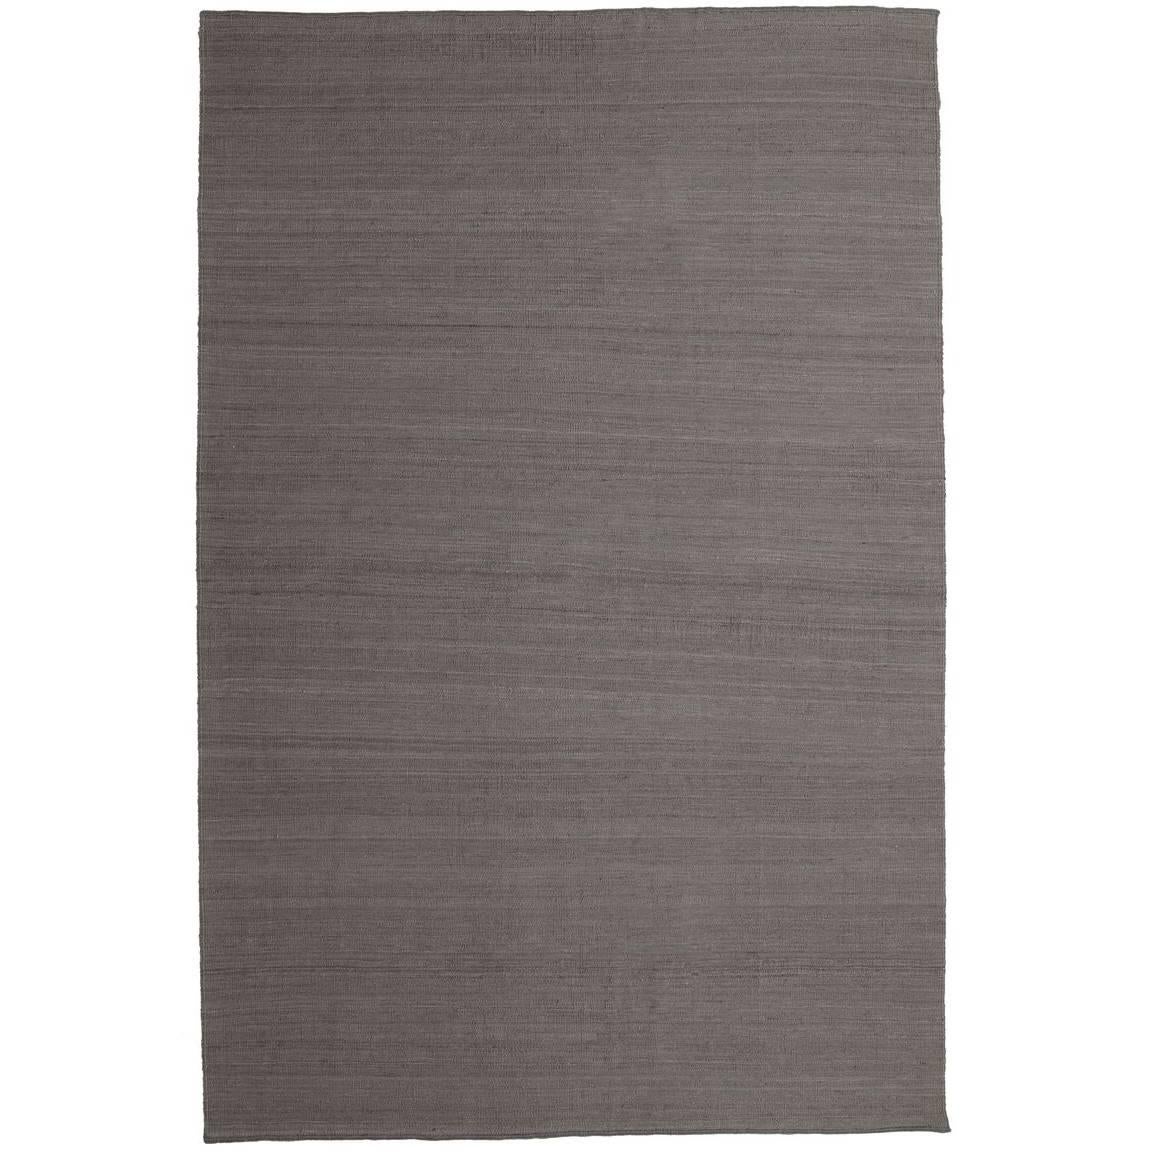 Nomad Grey Hand-Loomed Wool Rug by Nani Marquina & Ariadna Miquel, Medium For Sale